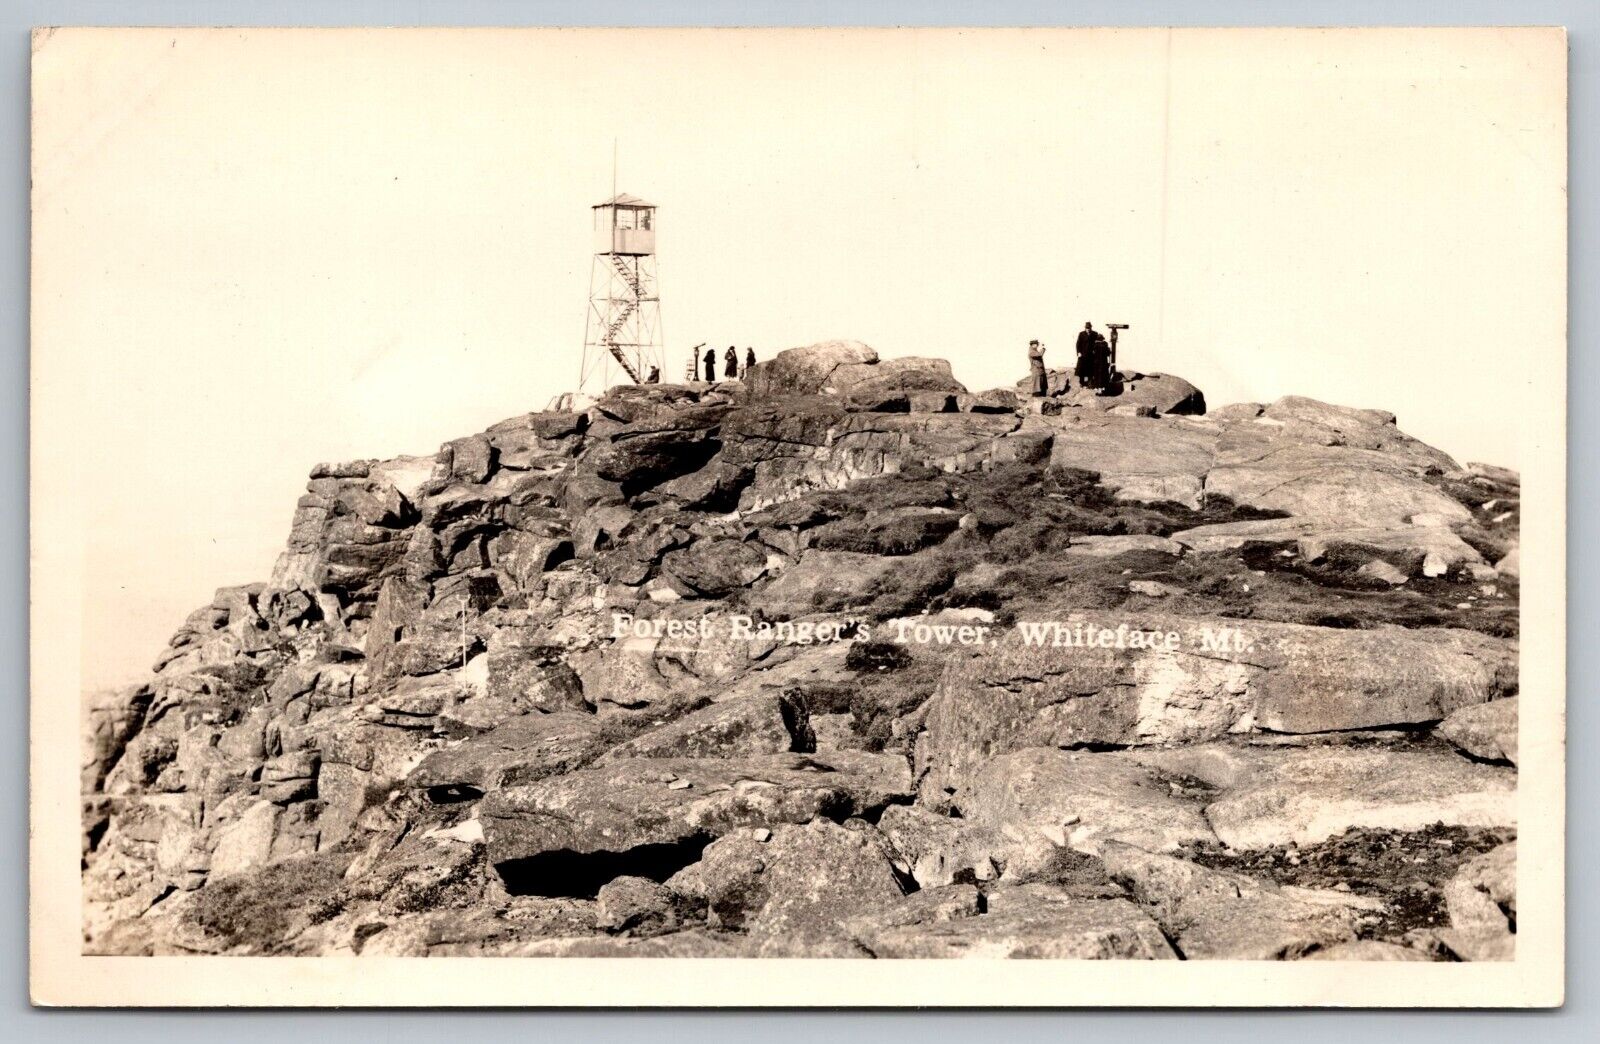 Forest Ranger Tower. Whiteface Mountain. New York Real Photo Postcard RPPC